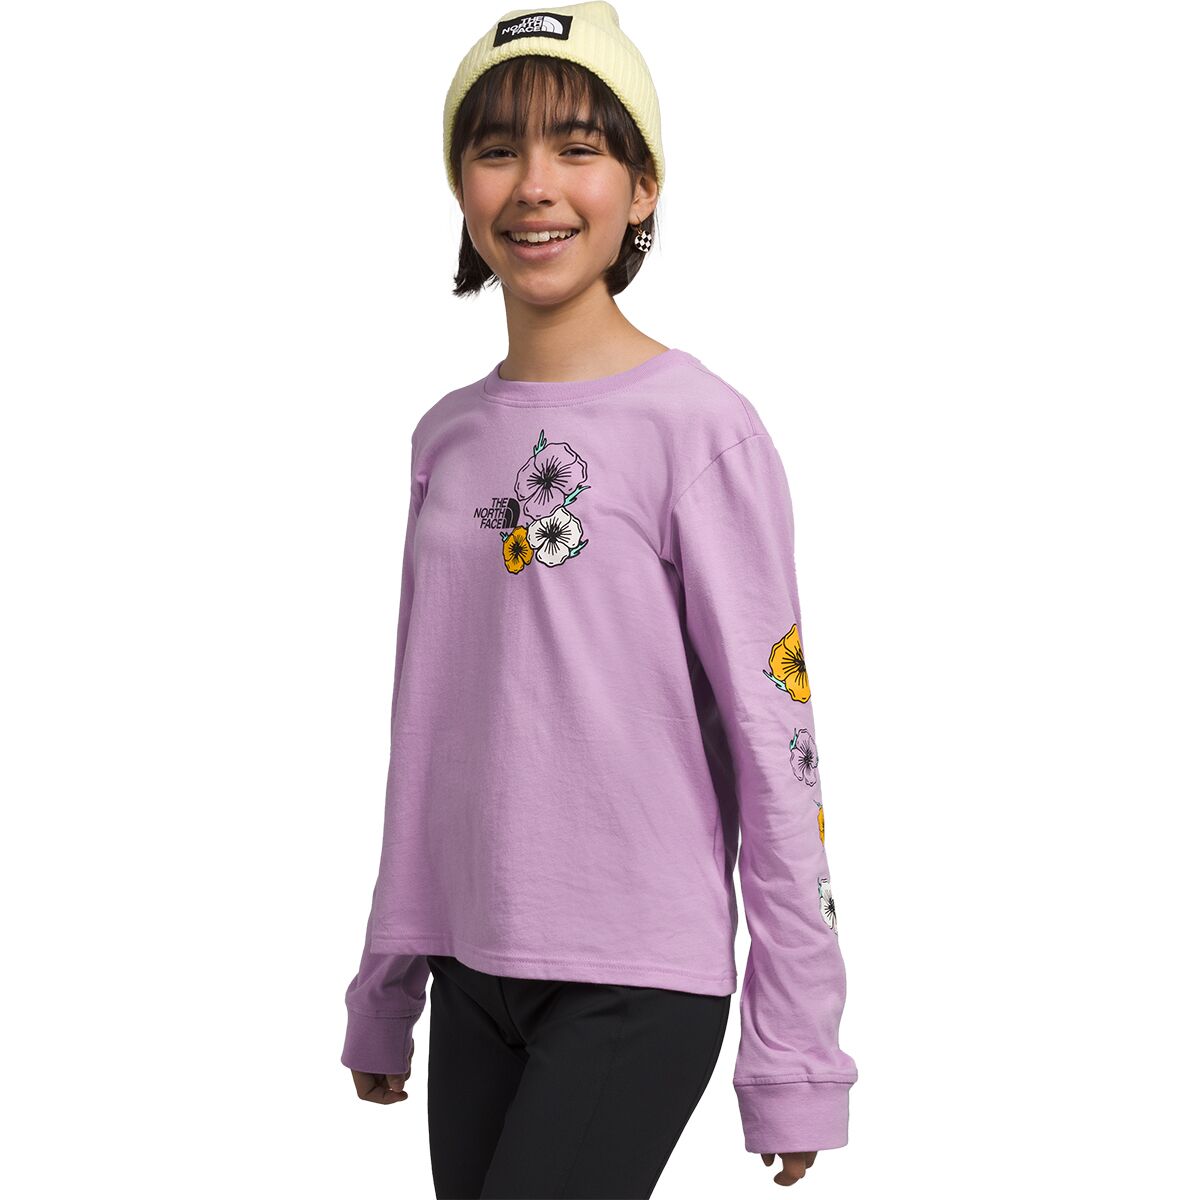 The North Face Graphic Long-Sleeve T-Shirt - Girls